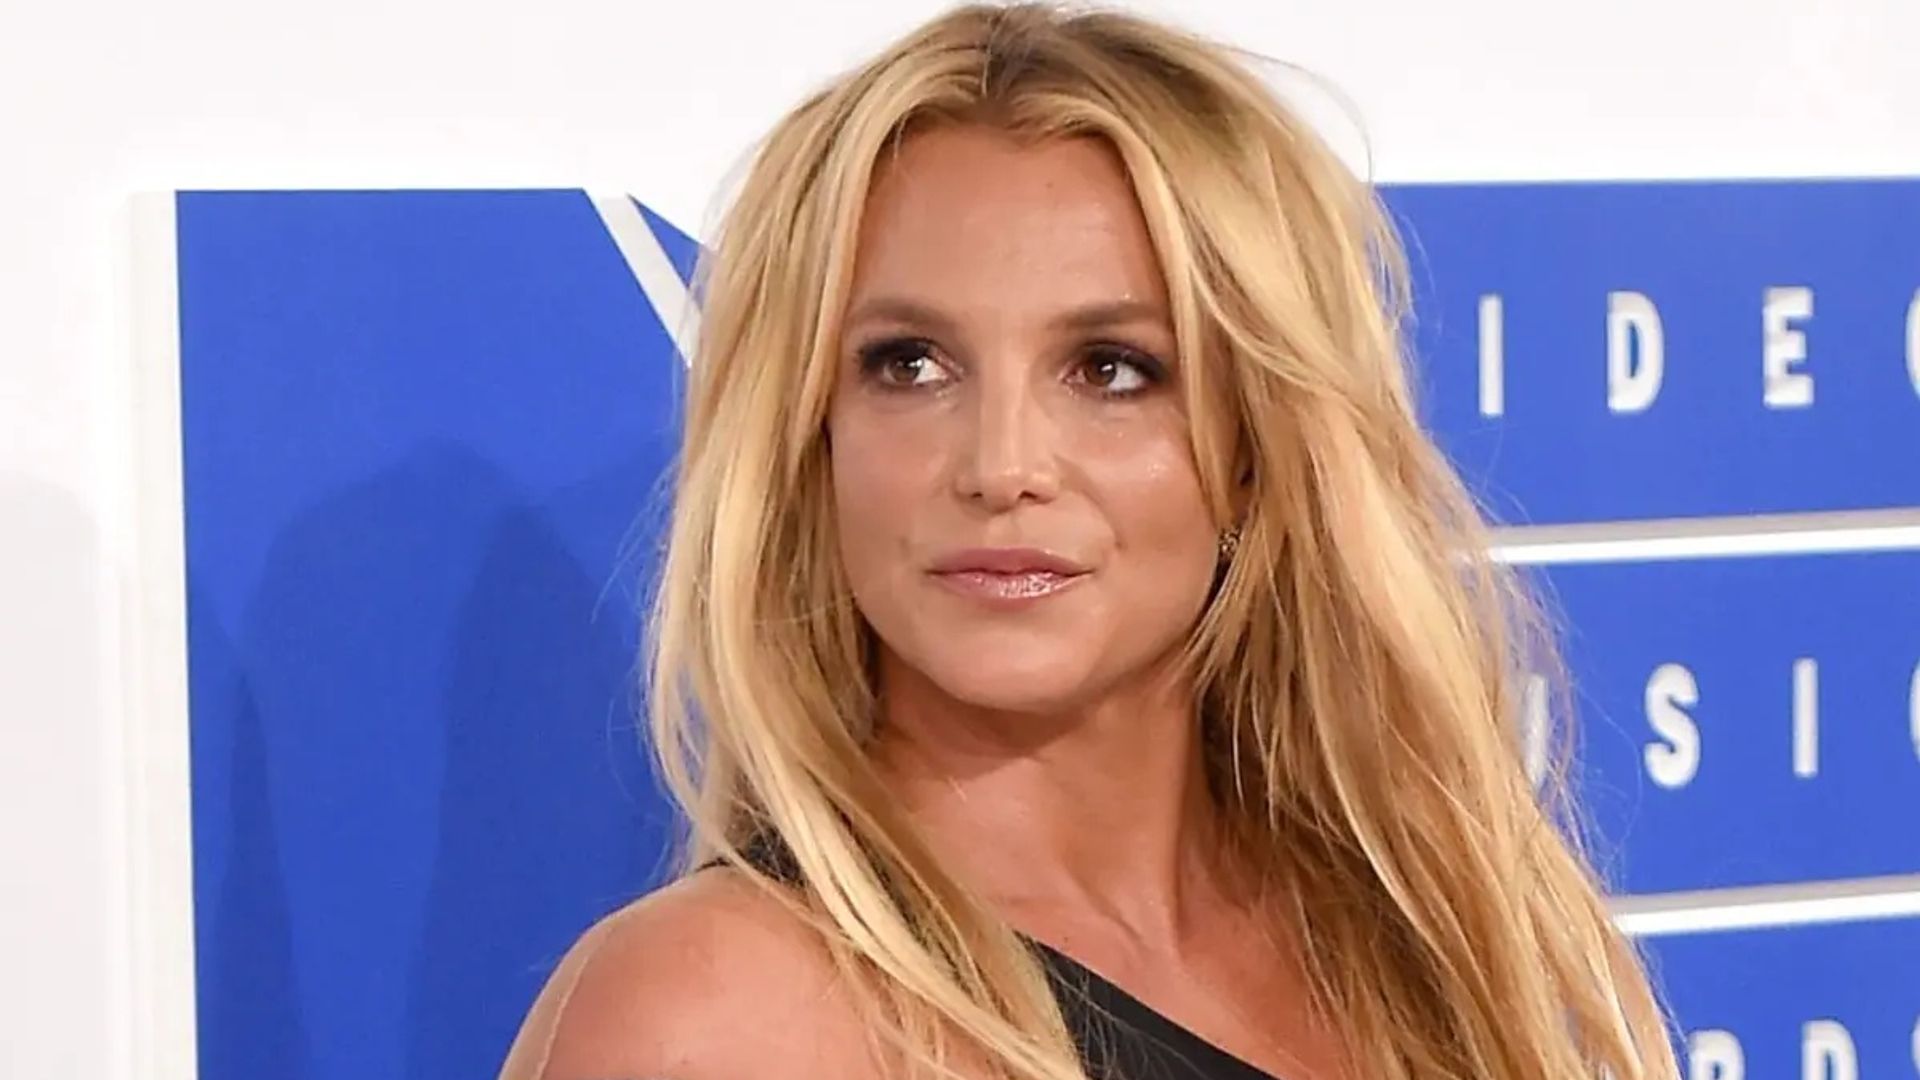 Britney Spears and Sam Asghari share heartbreaking miscarriage news: 'This is a devastating time'